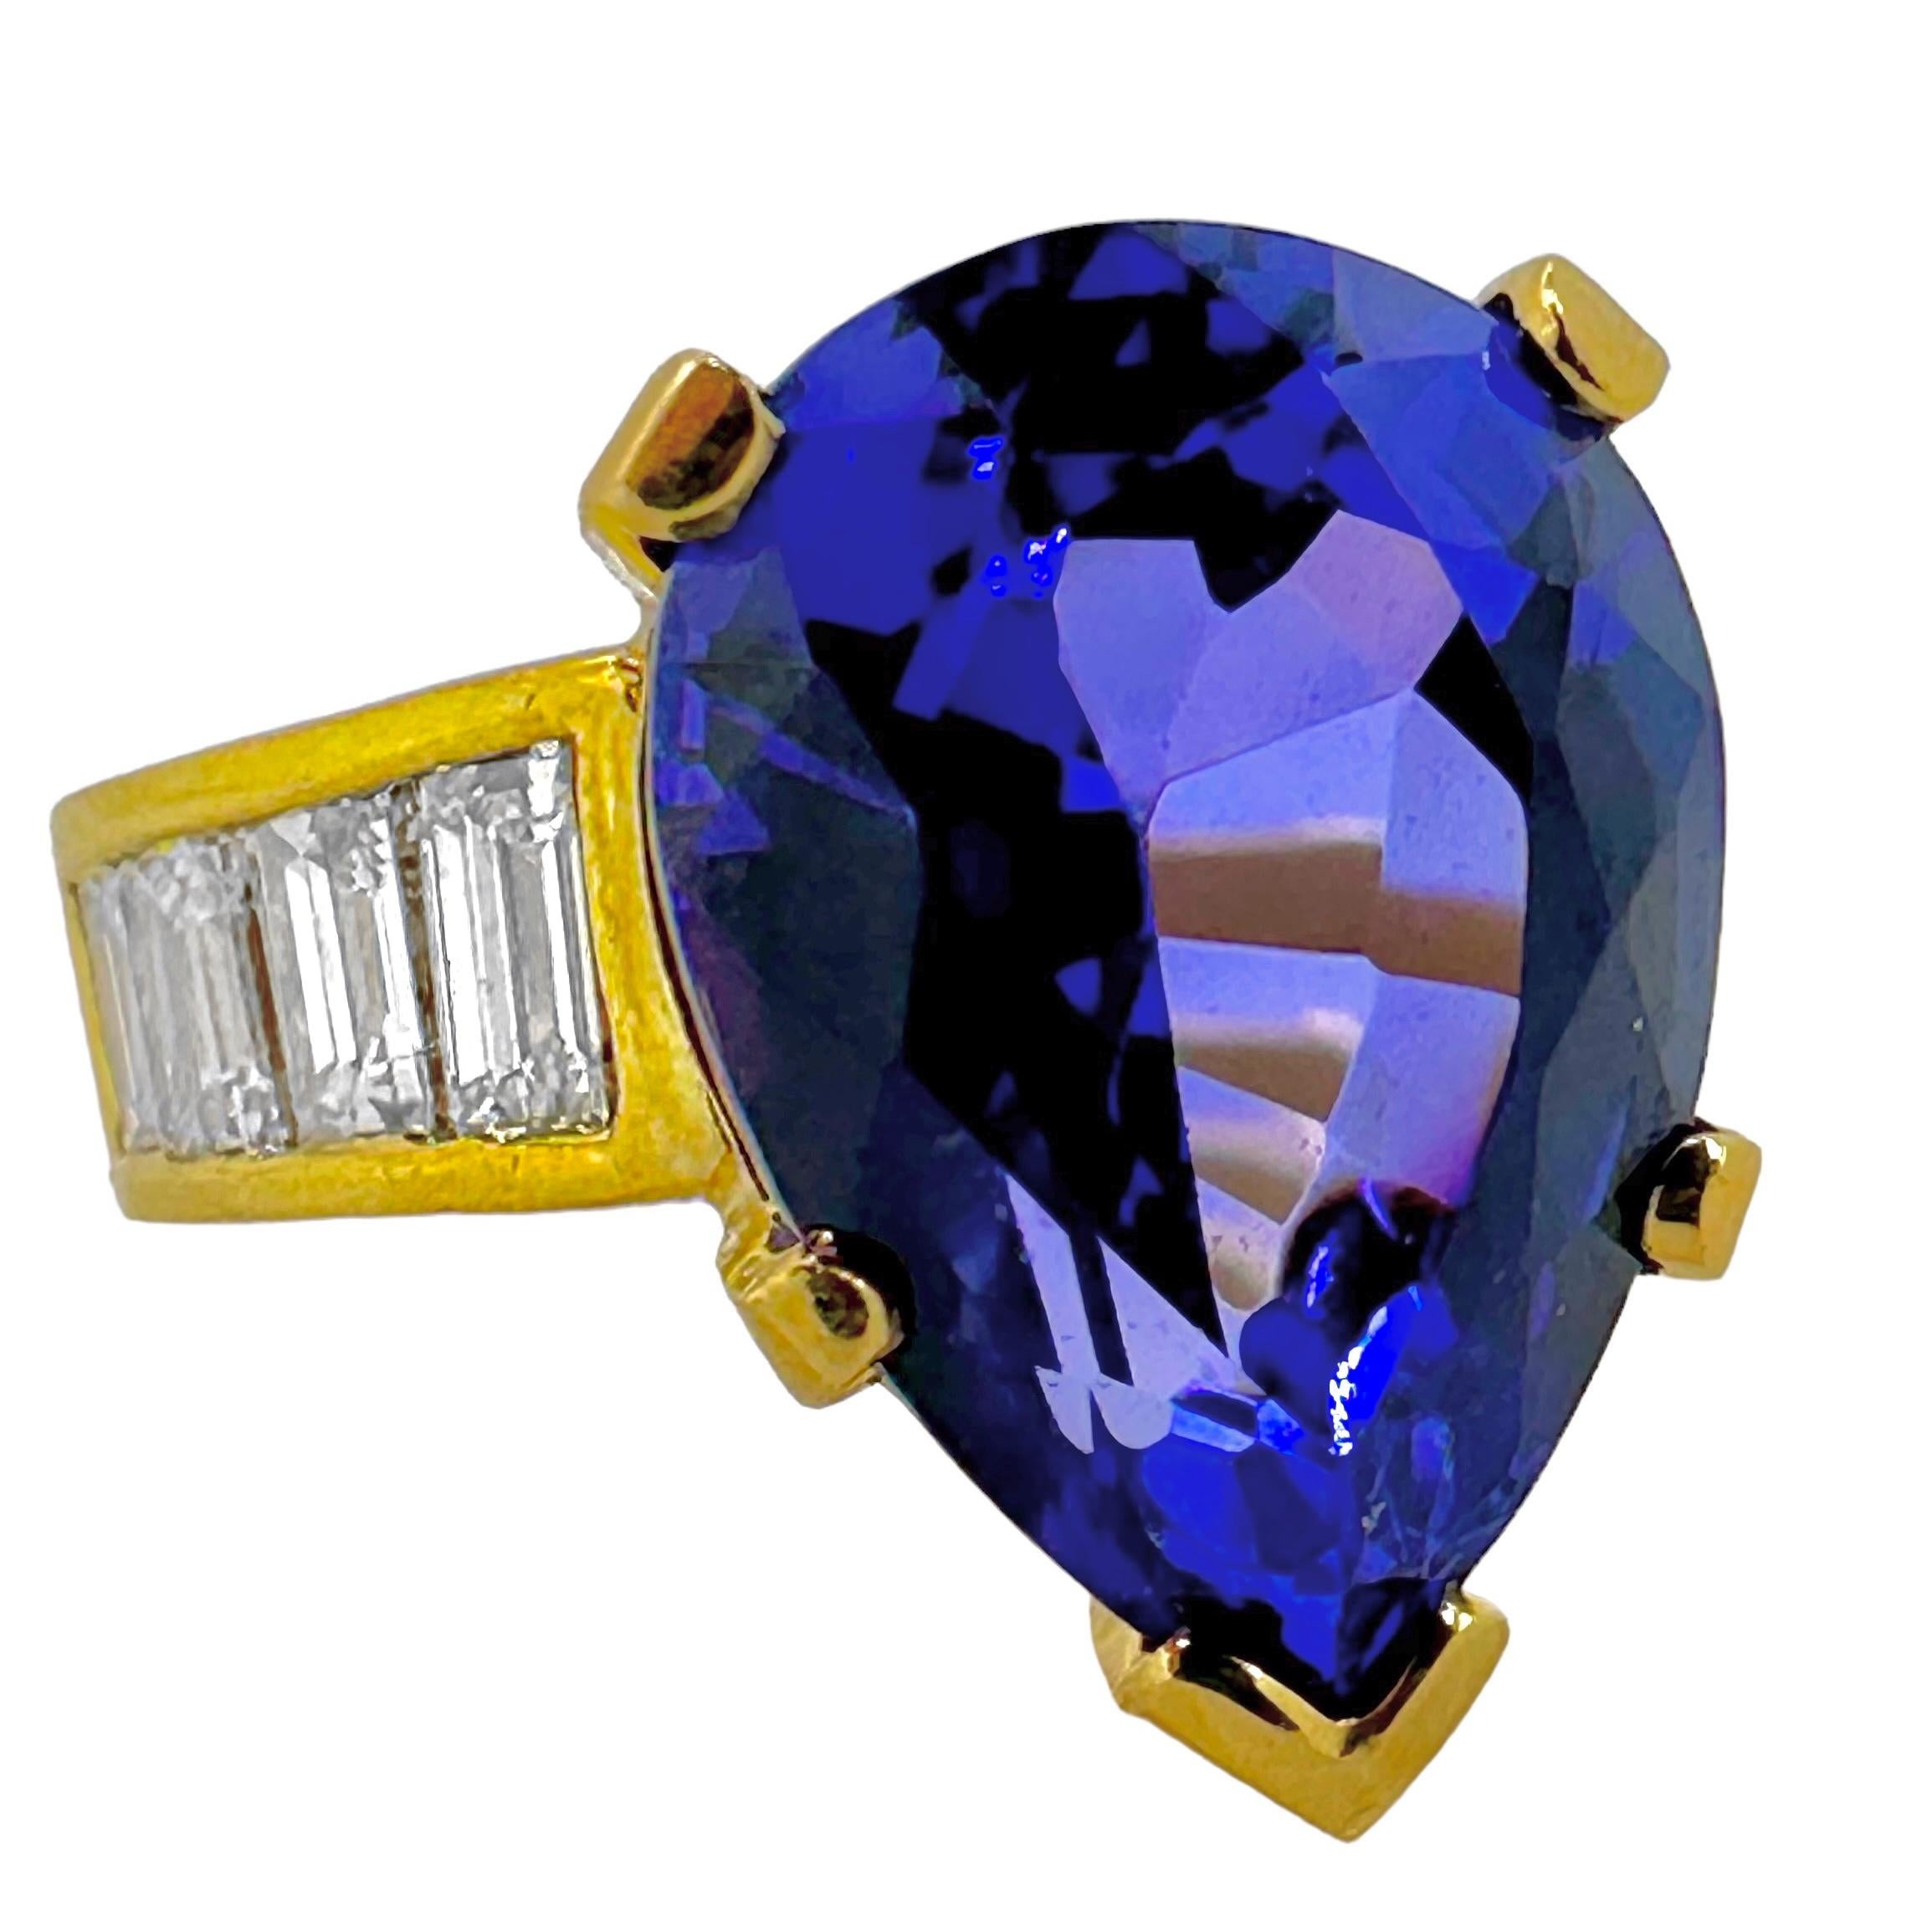 An 18K yellow gold ring centered around a brilliant, richly colored pear-shaped Tanzanite weighing approximately 7.50ct. This amazing Tanzanite is an ideal pear shape cut and features a mixture of beautiful shades of blue and vibrant violet. The